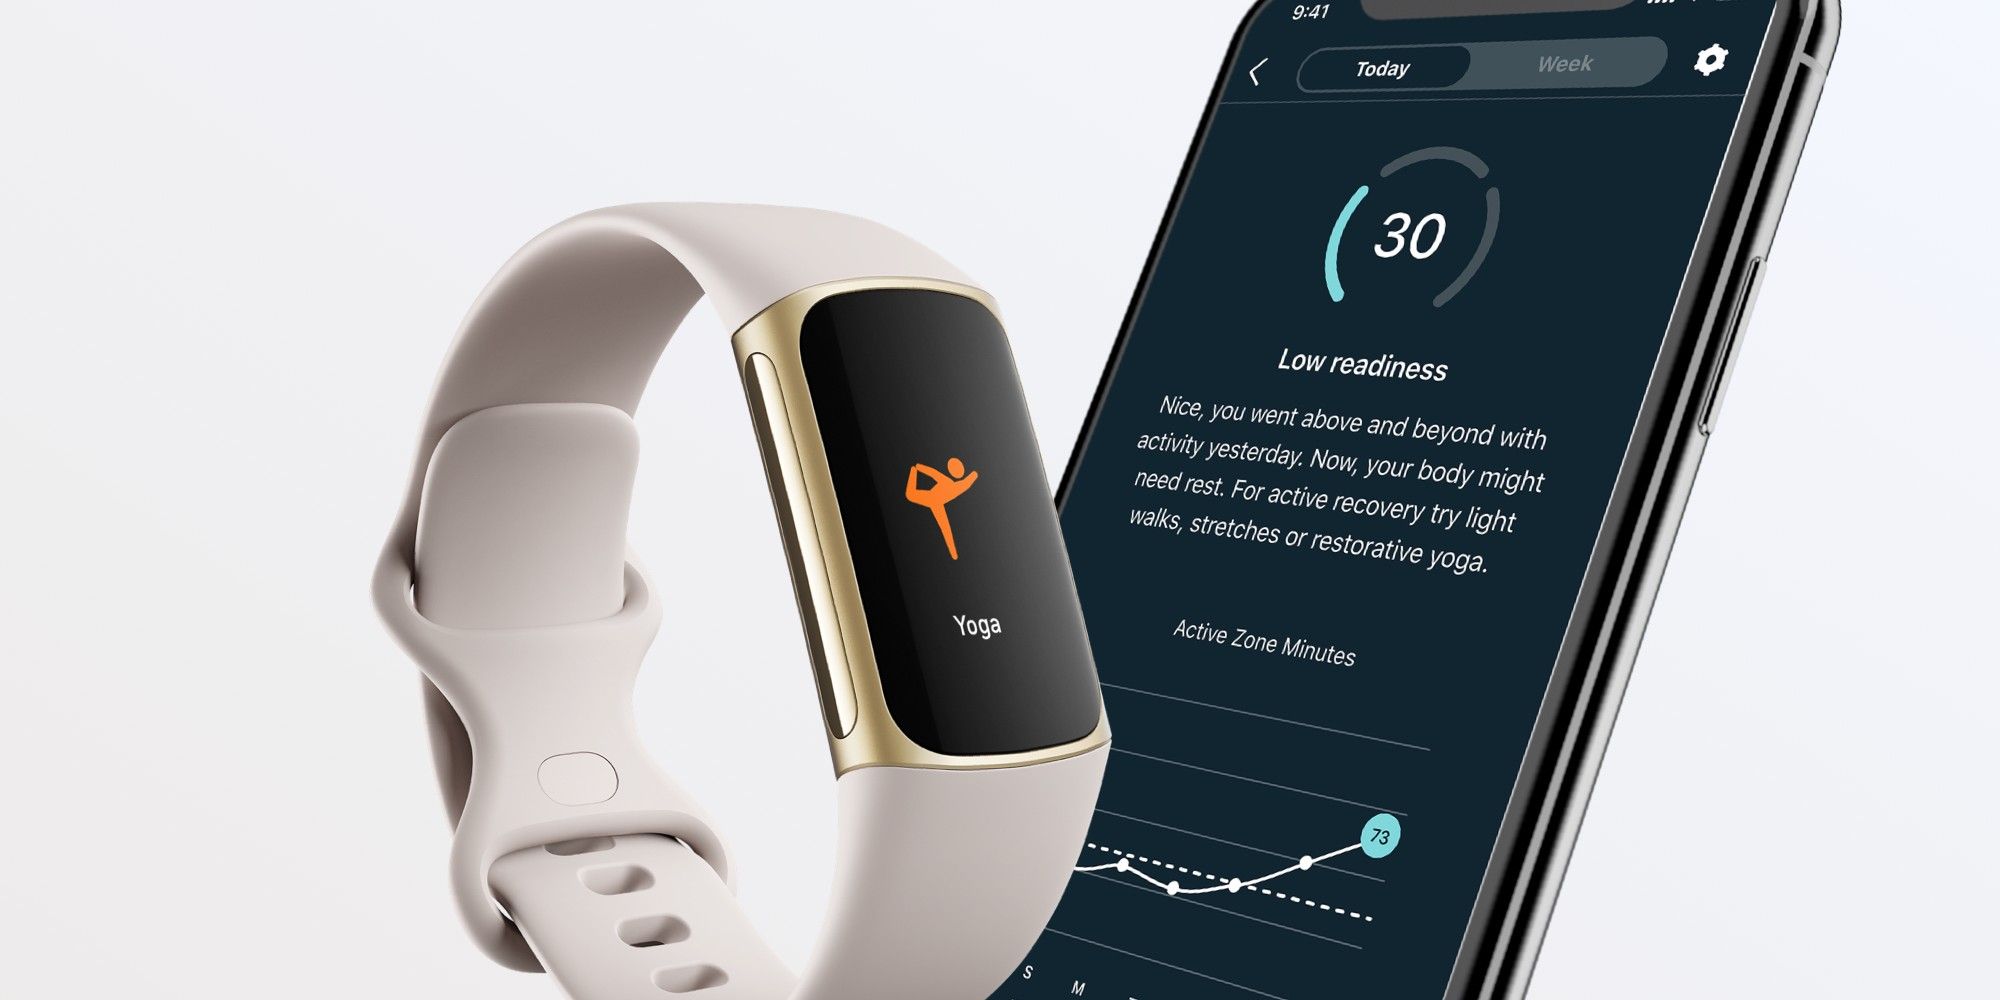 Fitbit Discontinuing Its PC/Mac Sync App: Here’s What You Need To Know